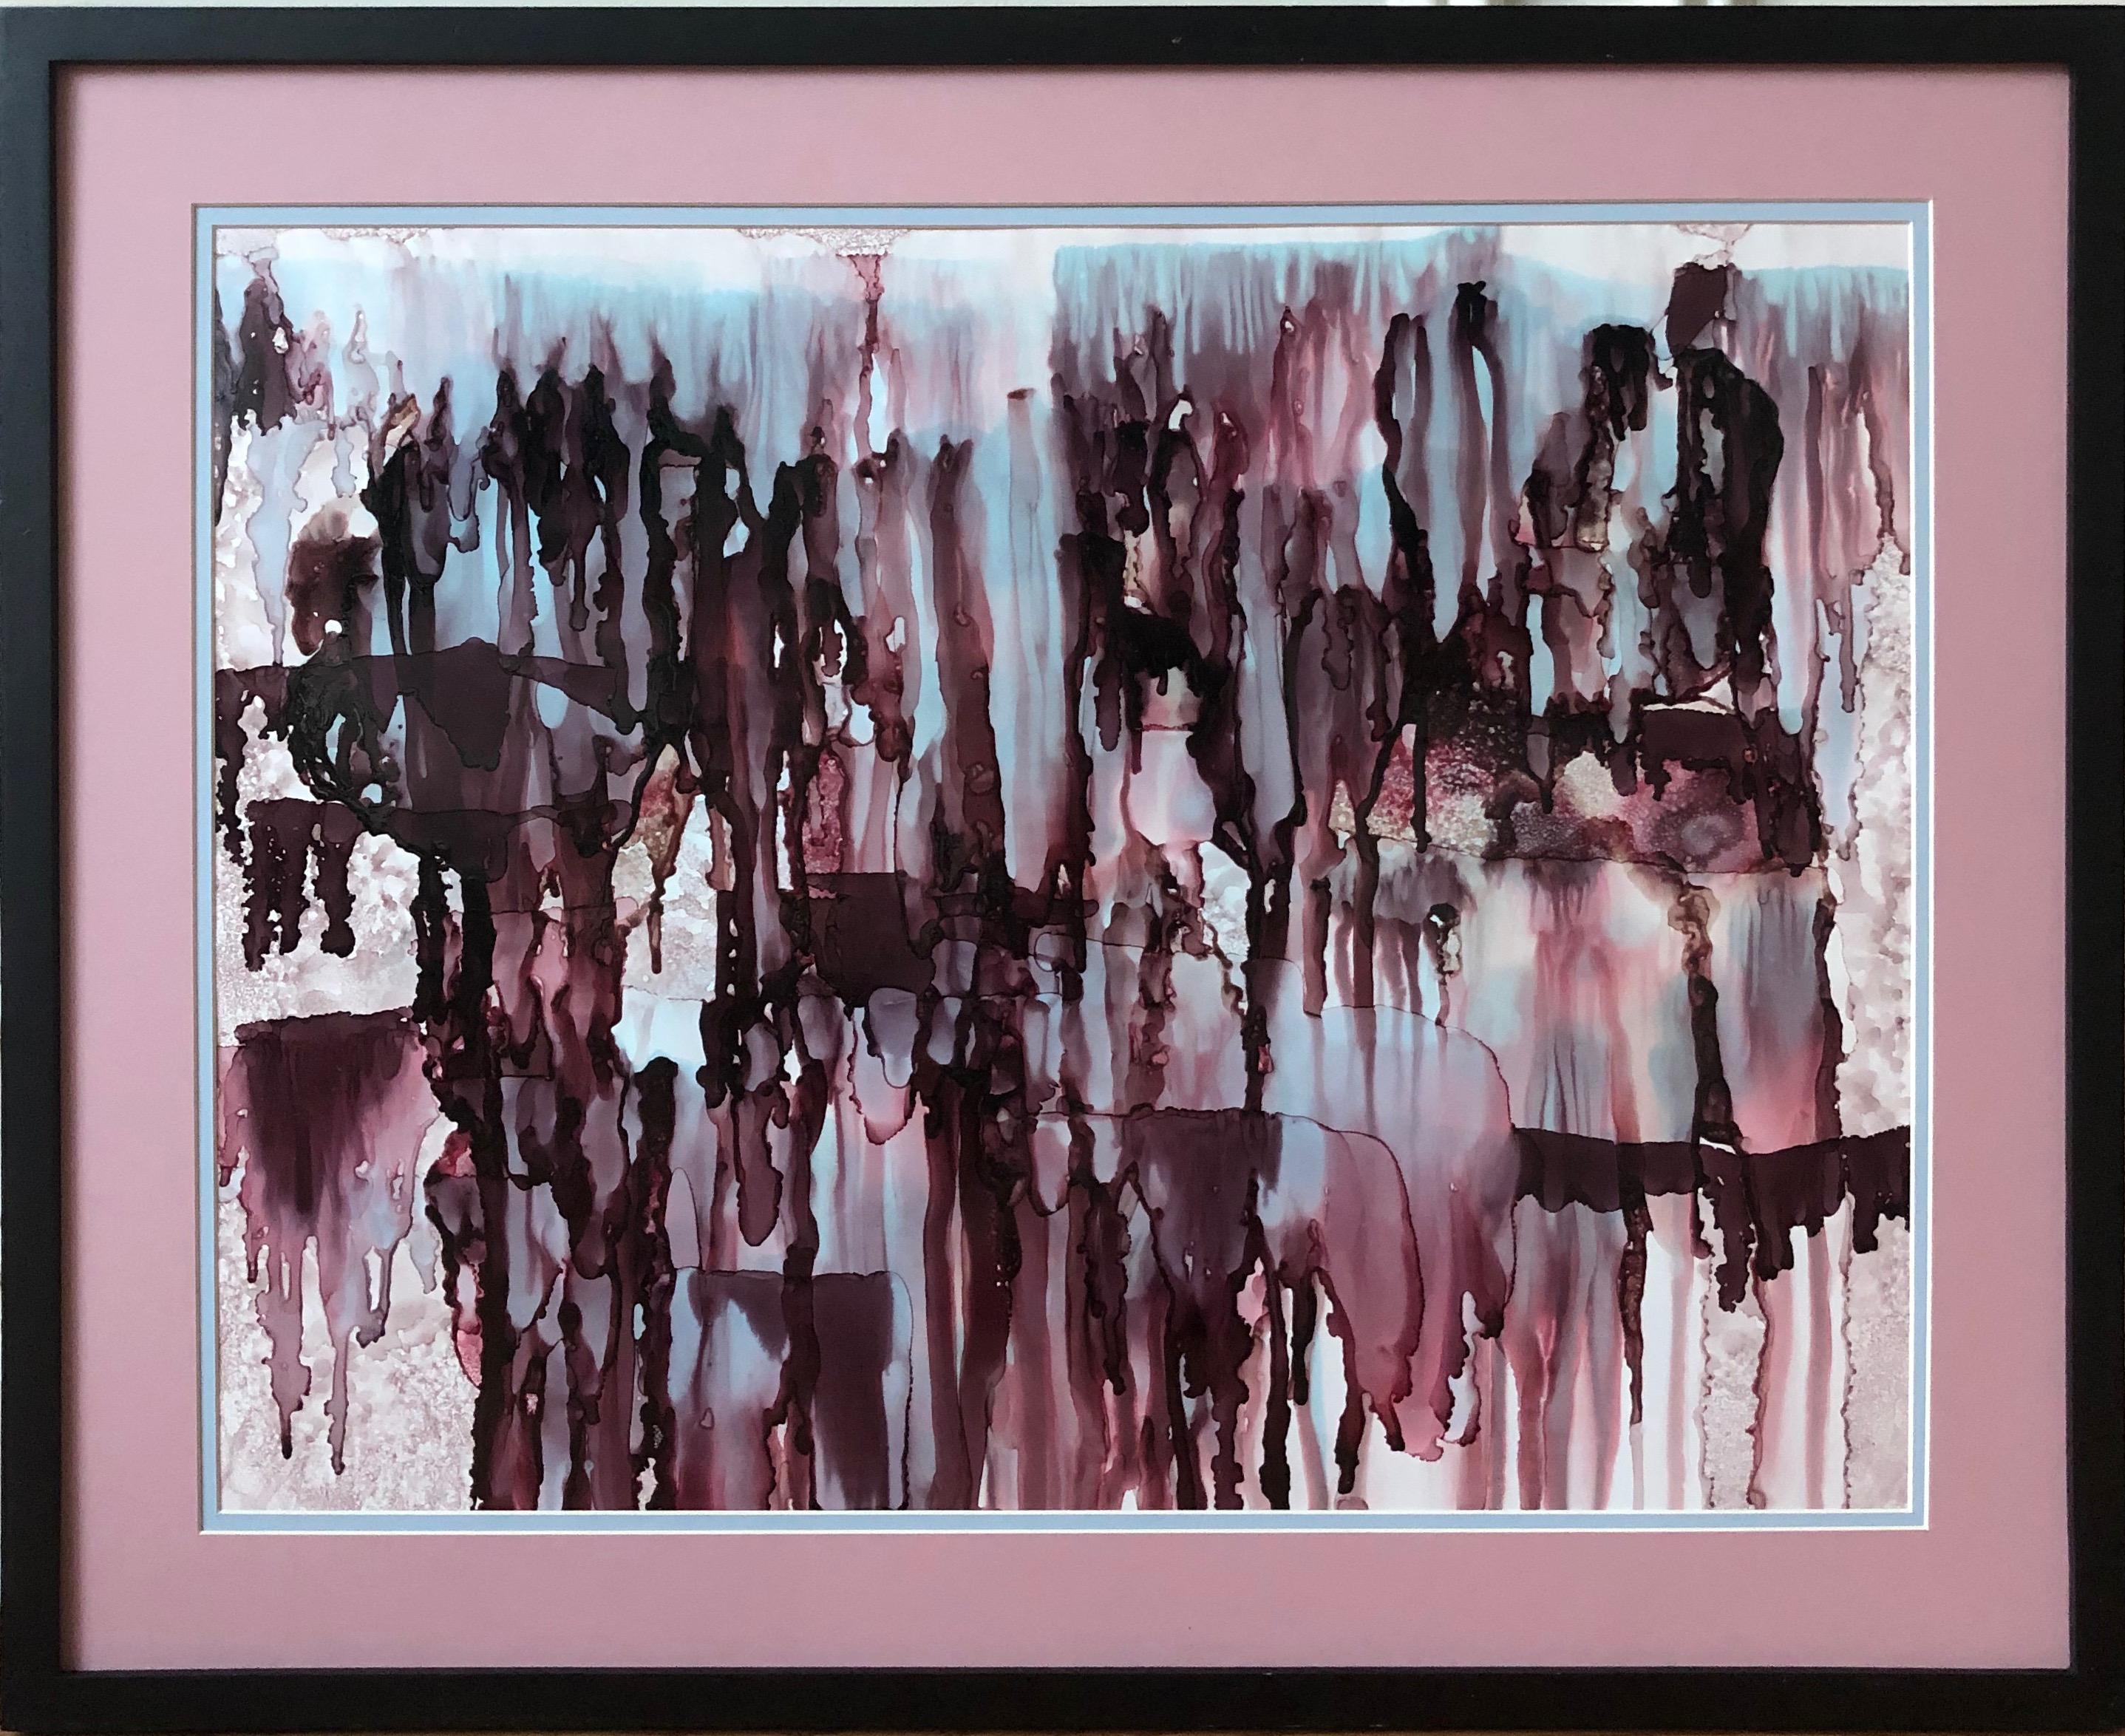 Interior design paintings. The work was done with alcohol ink in garnet red, light blue, aubergine color on Yupo paper. The work is 20 by 26 inches in size, framed in fine-quality solid wood with a styrene face on a double mat board in gray with